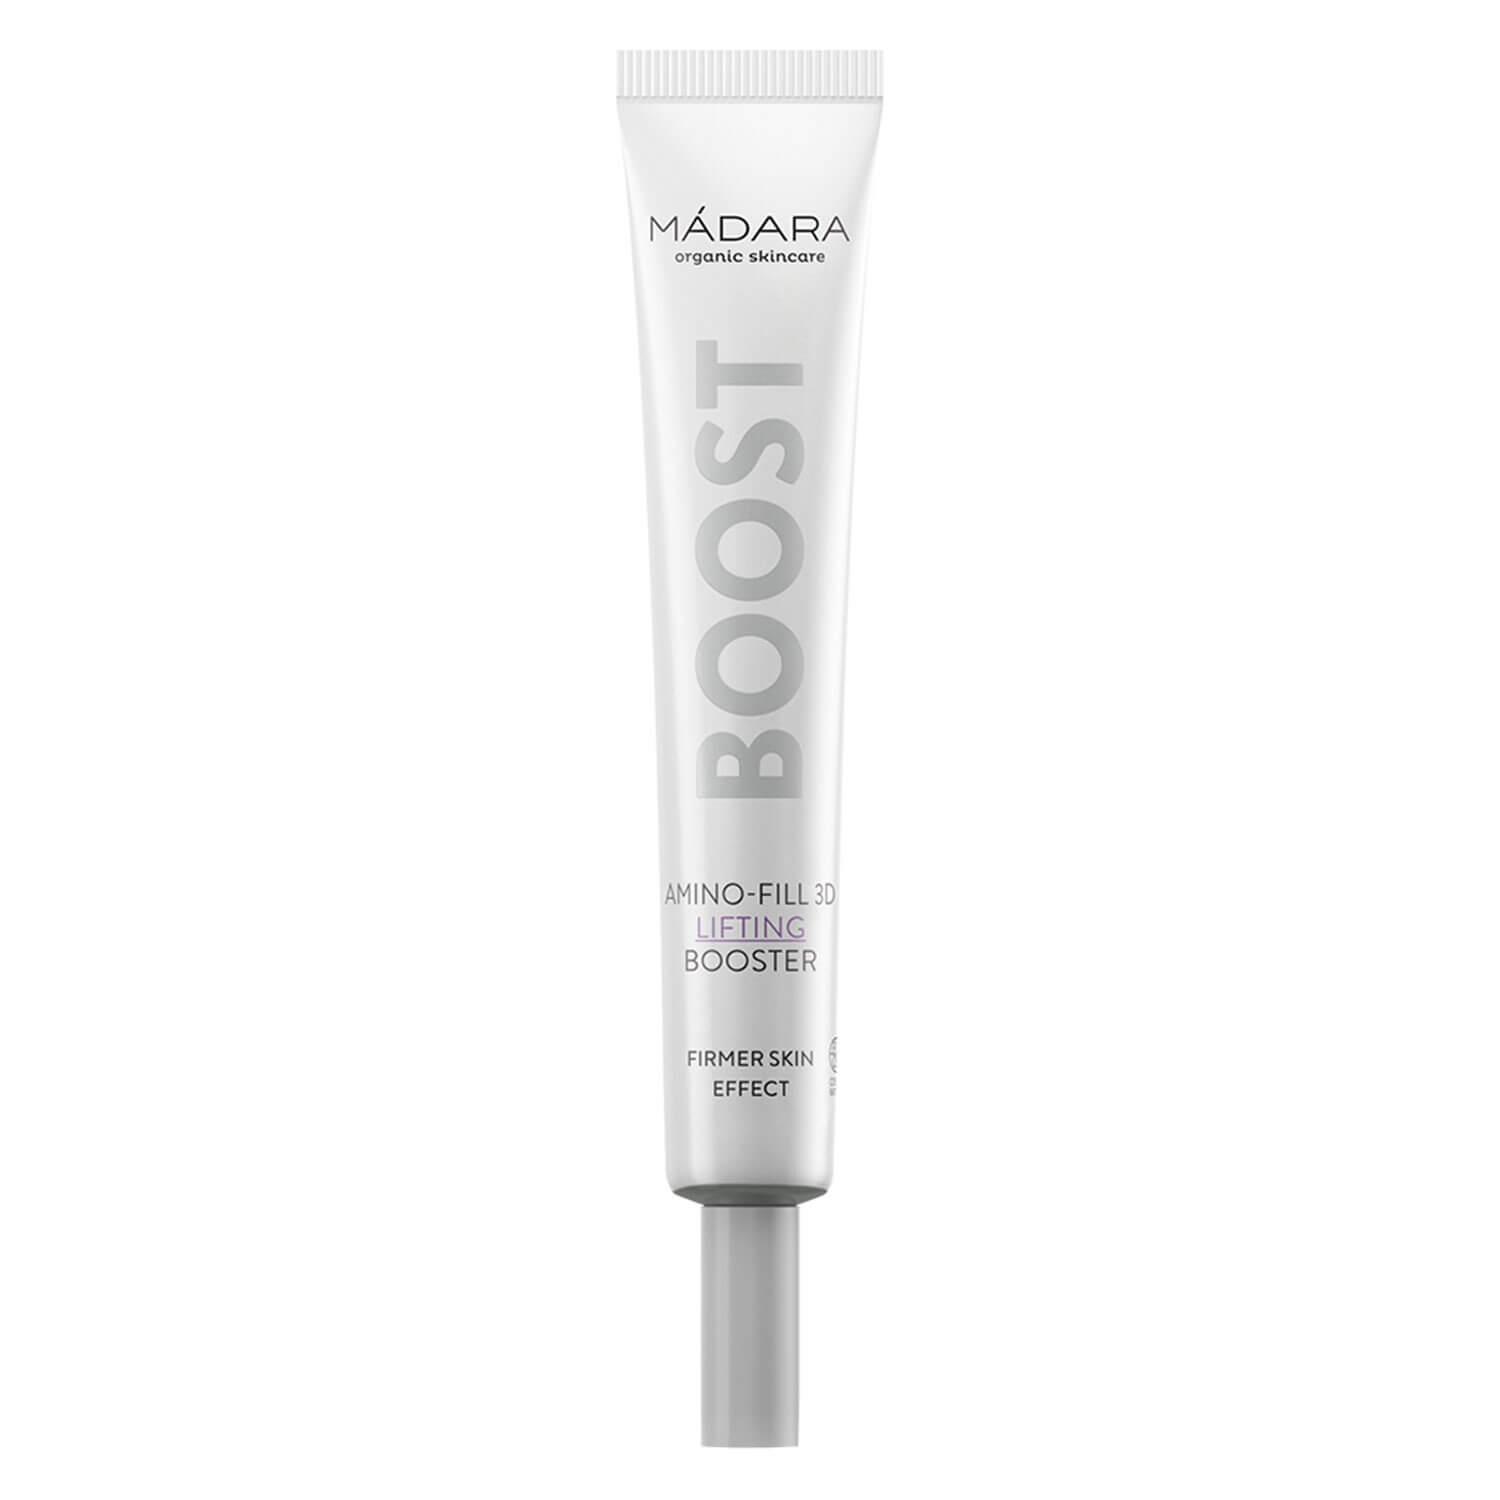 Product image from MÁDARA Care - BOOST Amino-Fill 3D Lifting Booster